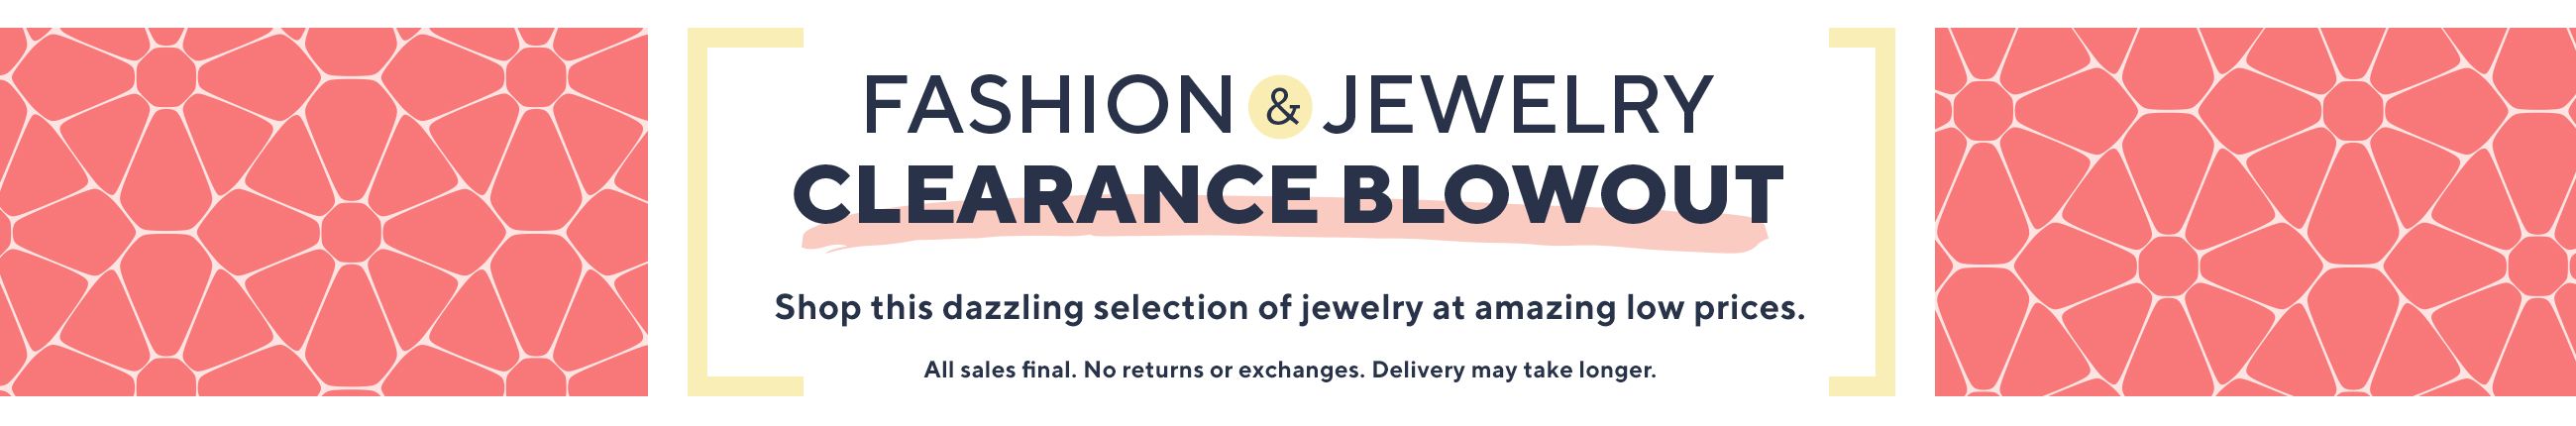 Fashion & Jewelry Clearance Blowout  - Shop this dazzling selection of jewelry at amazing low prices.   All sales final. No returns or exchanges. Delivery may take longer.